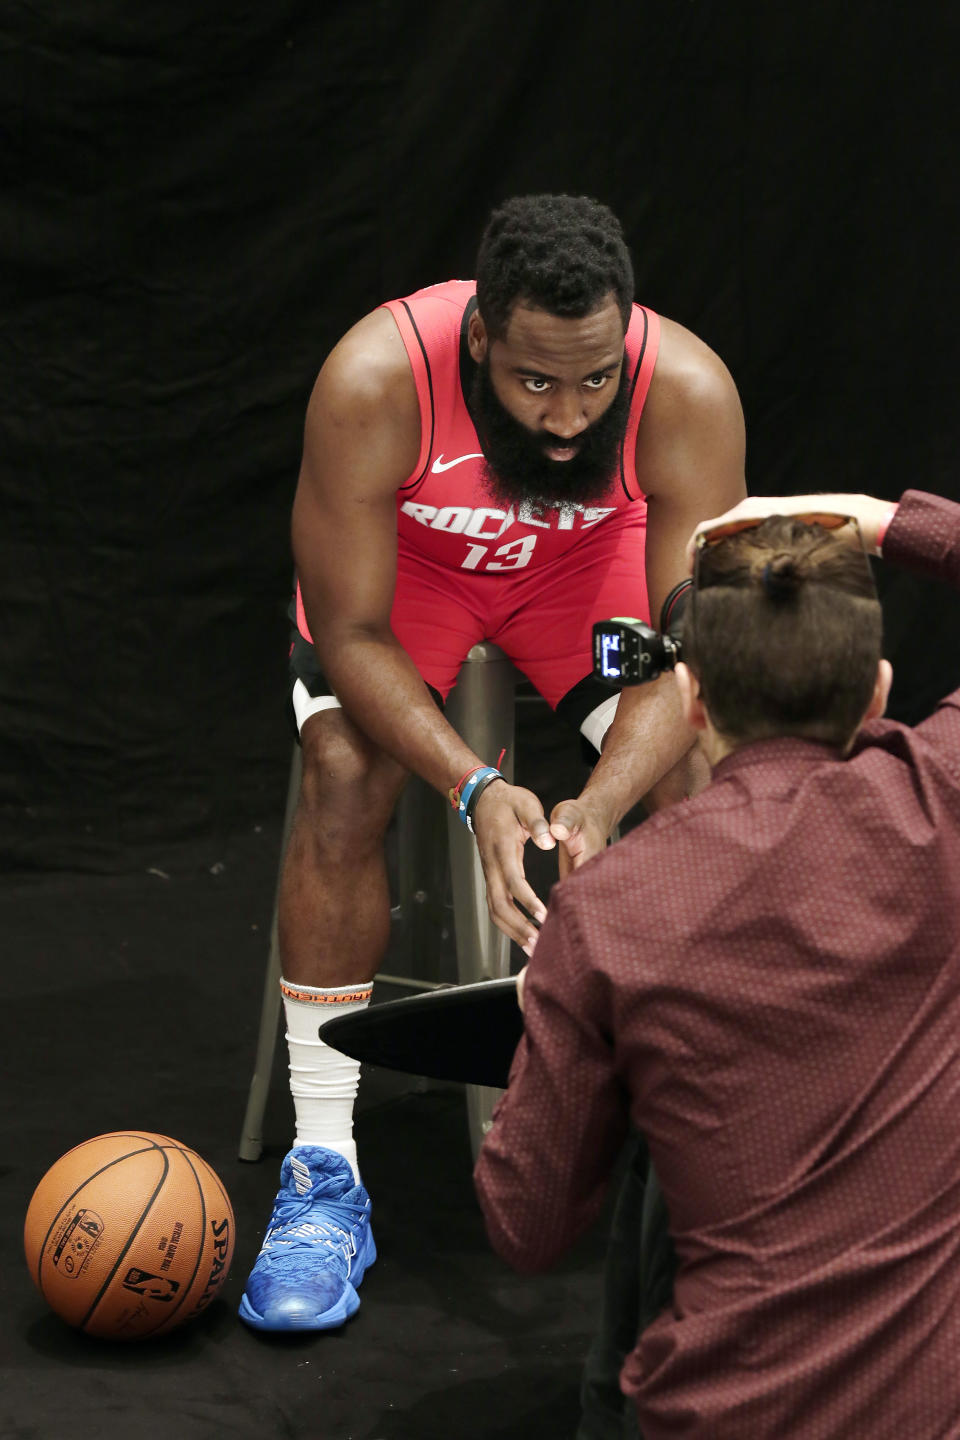 Houston Rockets' James Harden is photographed during NBA basketball media day Friday, Sept. 27, 2019, in Houston. (AP Photo/Michael Wyke)